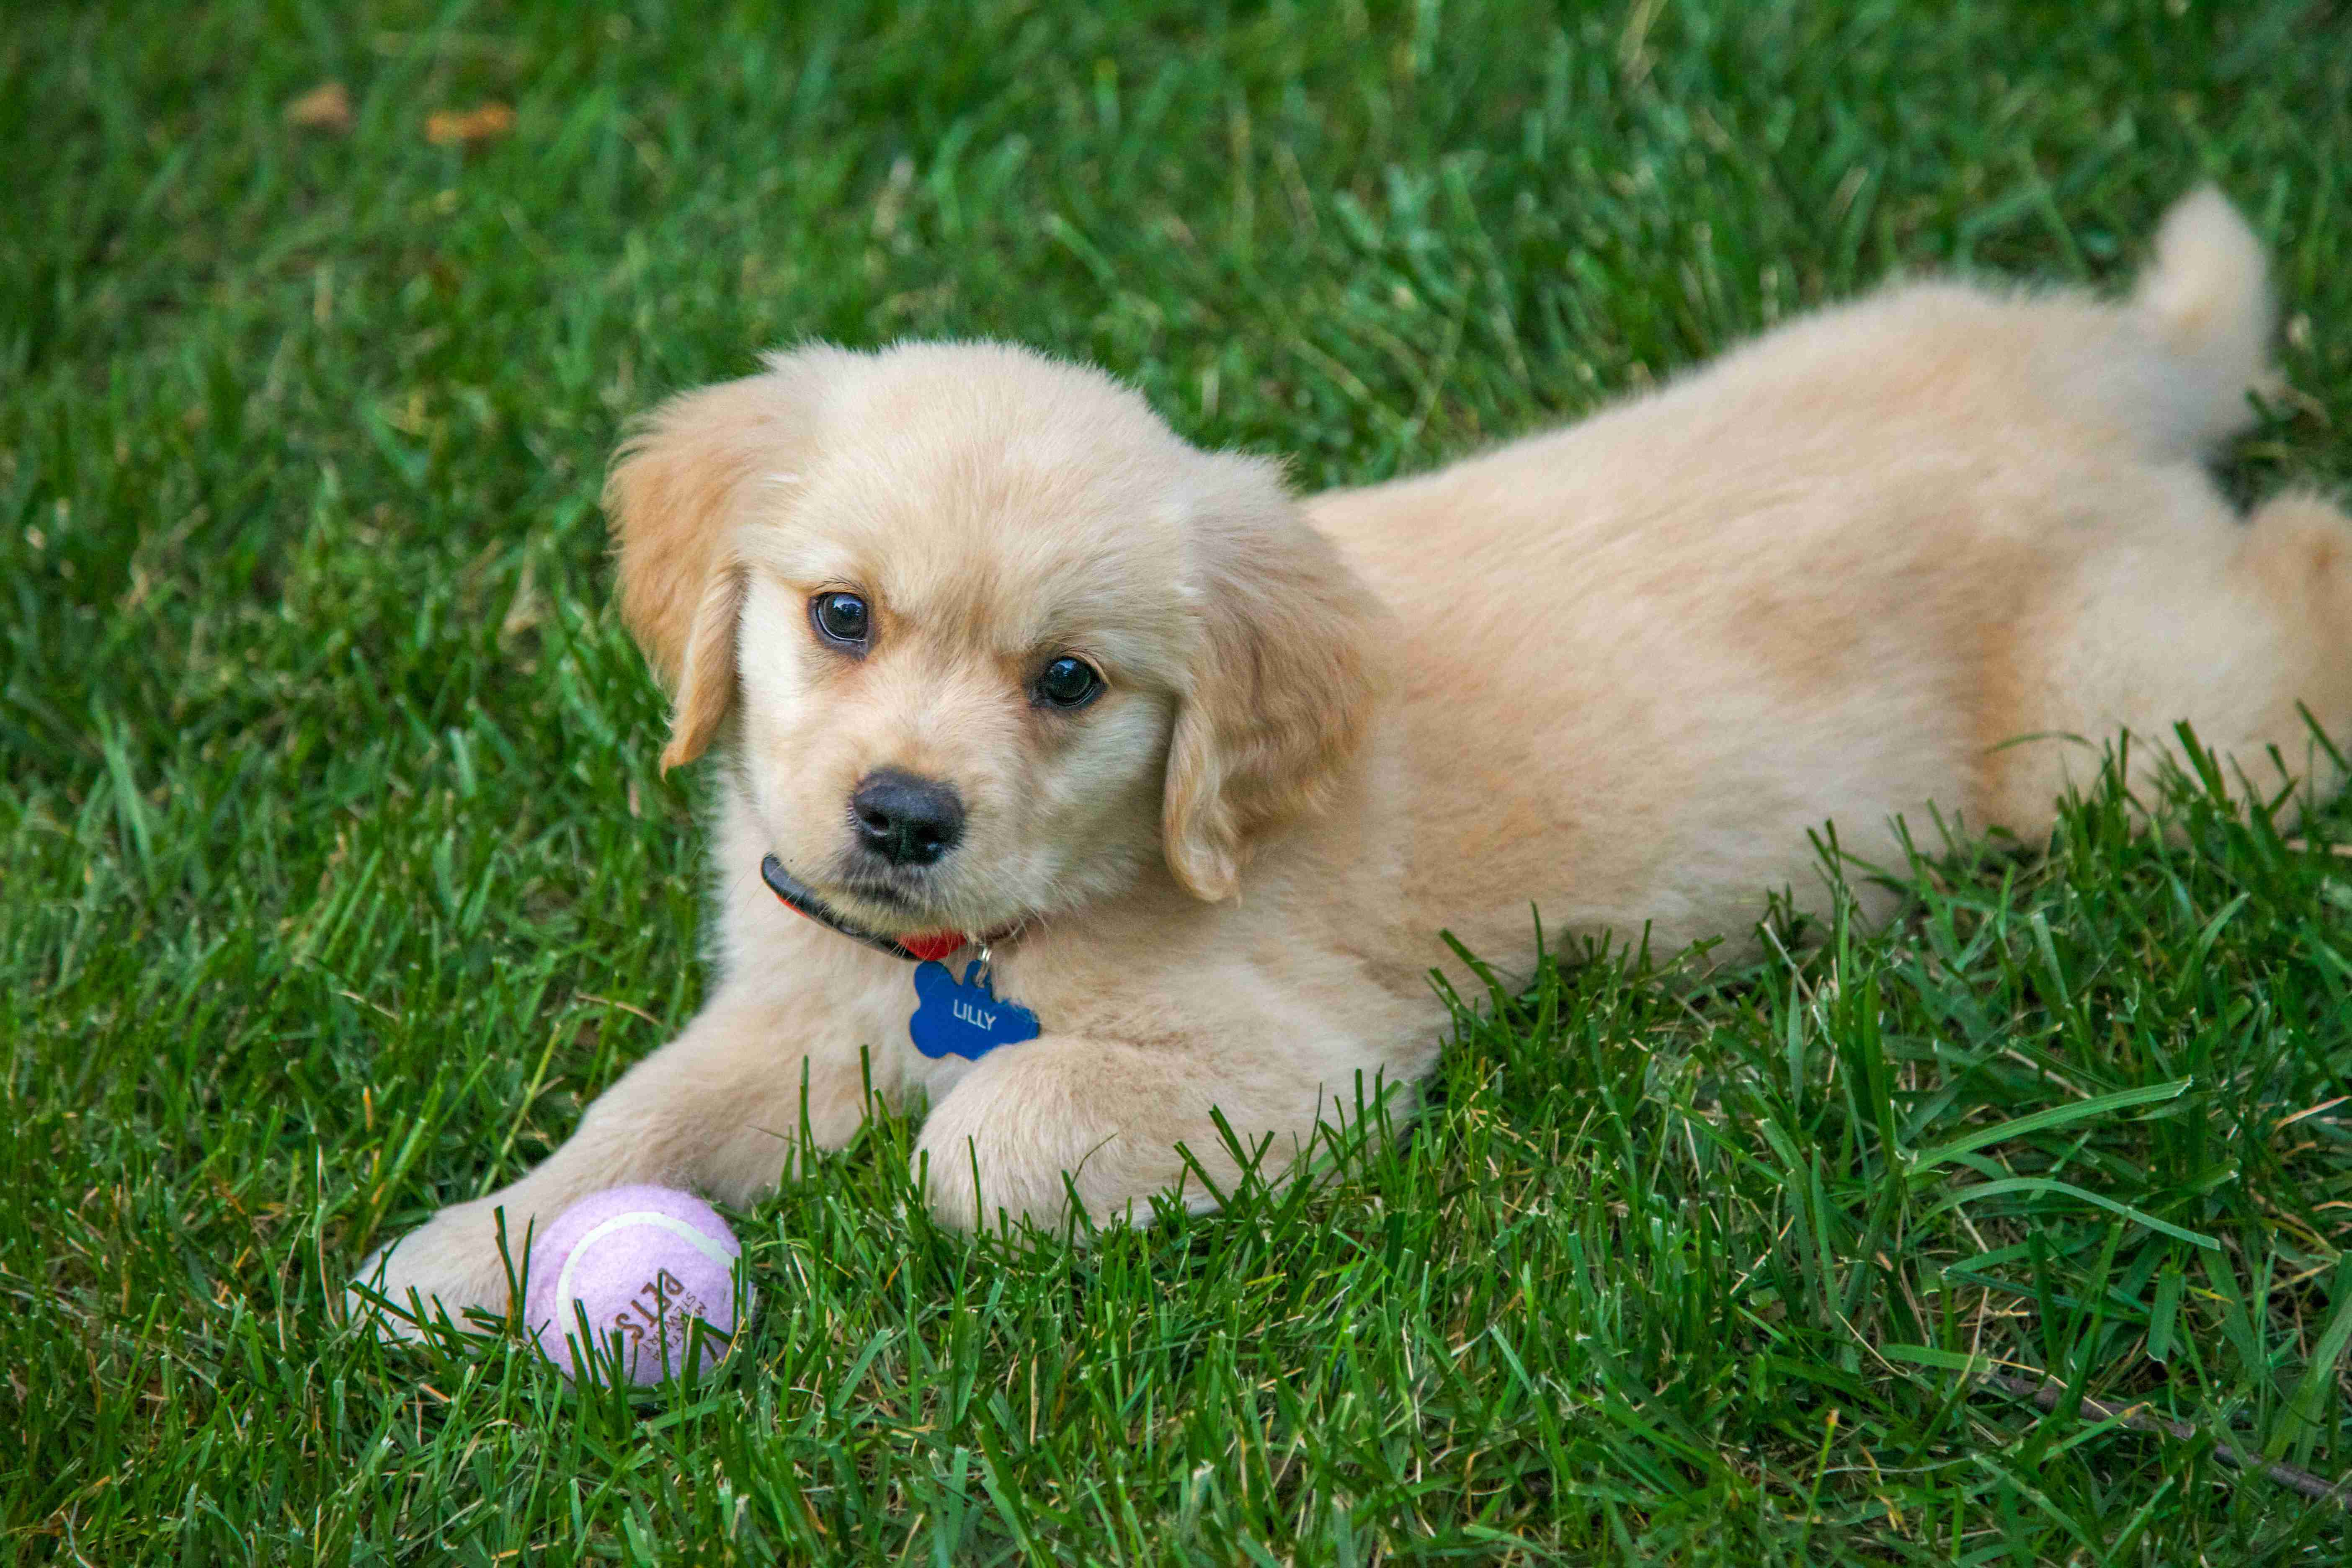 How often should I take my Golden Retriever to the veterinarian for check-ups?